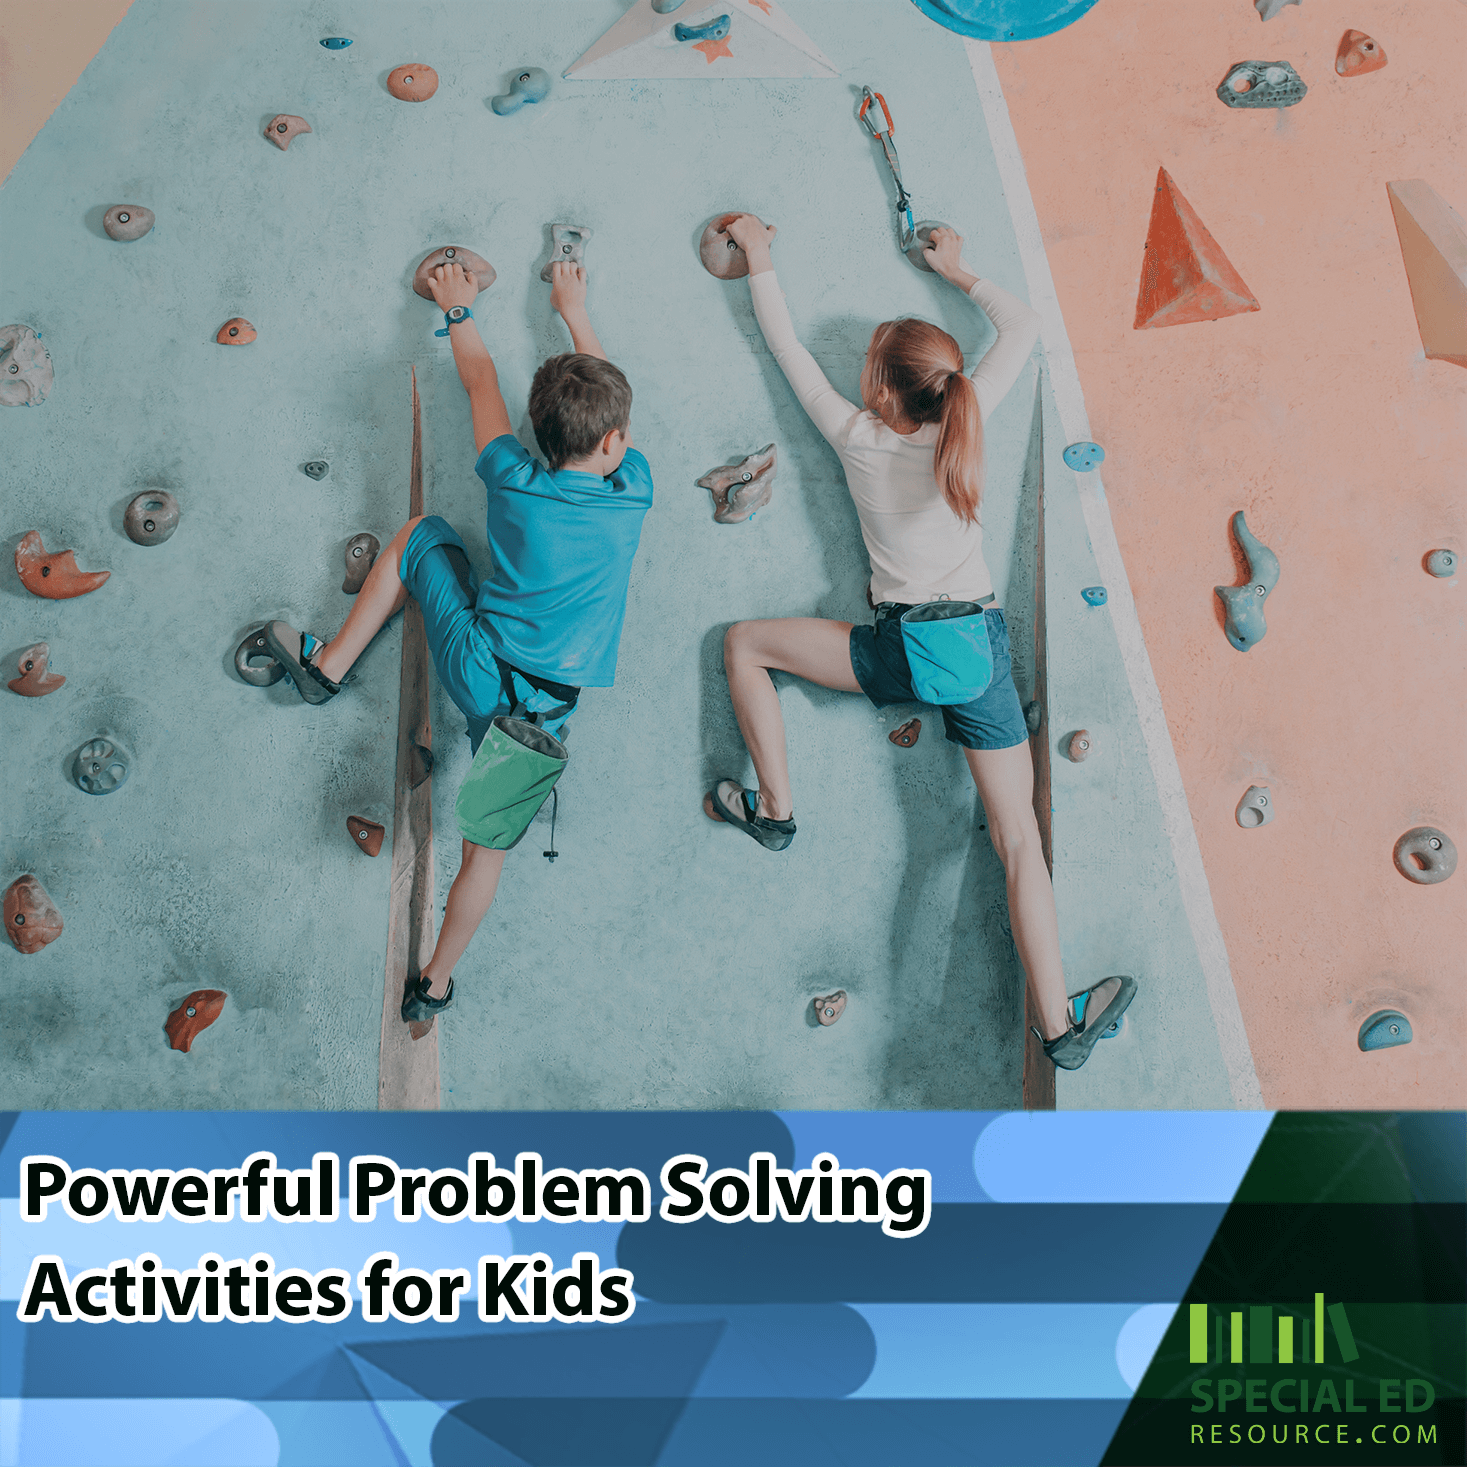 Two kids, a boy and a girl, engaging in problem solving activities for kids, as they climb an indoor rock climbing wall, demonstrating teamwork, problem-solving, and strategic thinking.